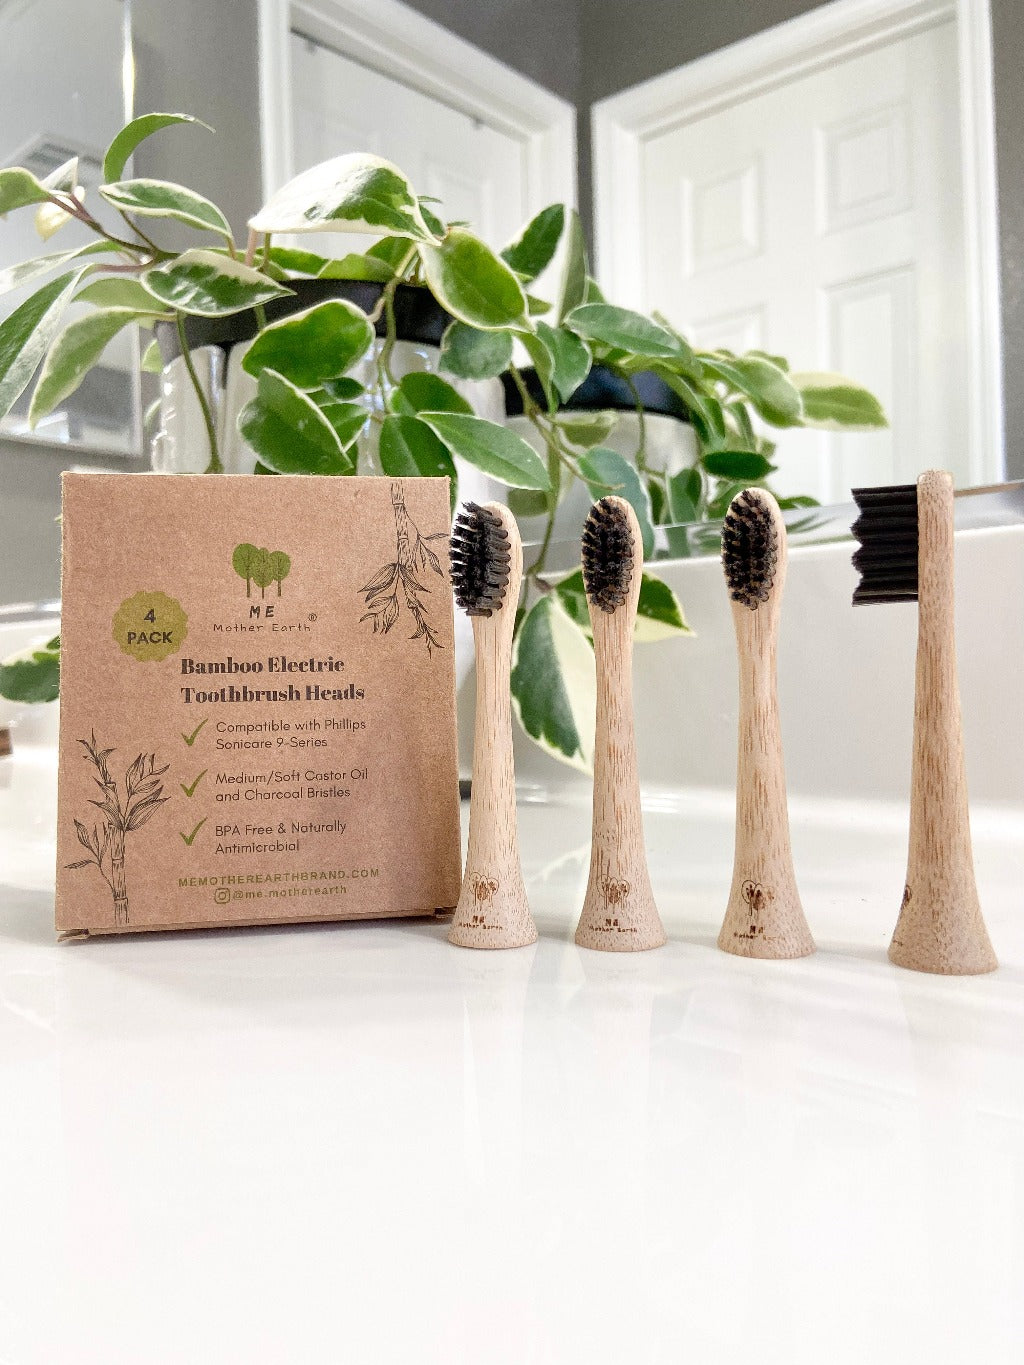 Bamboo Electric Toothbrush Heads 4-Pack - Case of 4